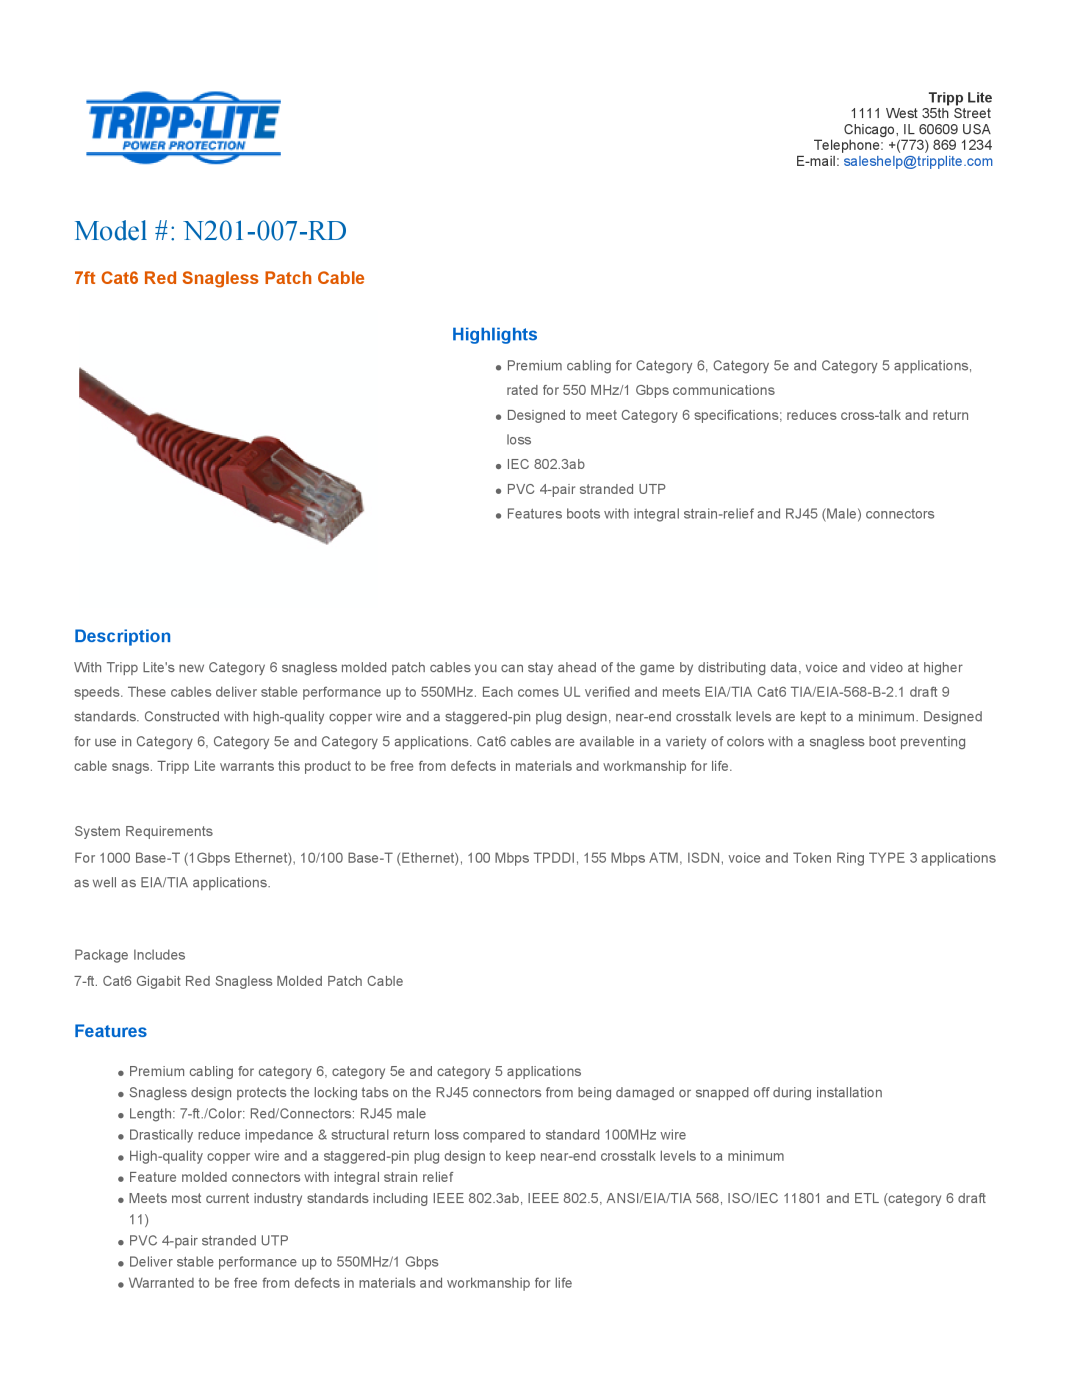 Tripp Lite specifications Highlights, Description, Features, Model # N201-007-RD, 7ft Cat6 Red Snagless Patch Cable 